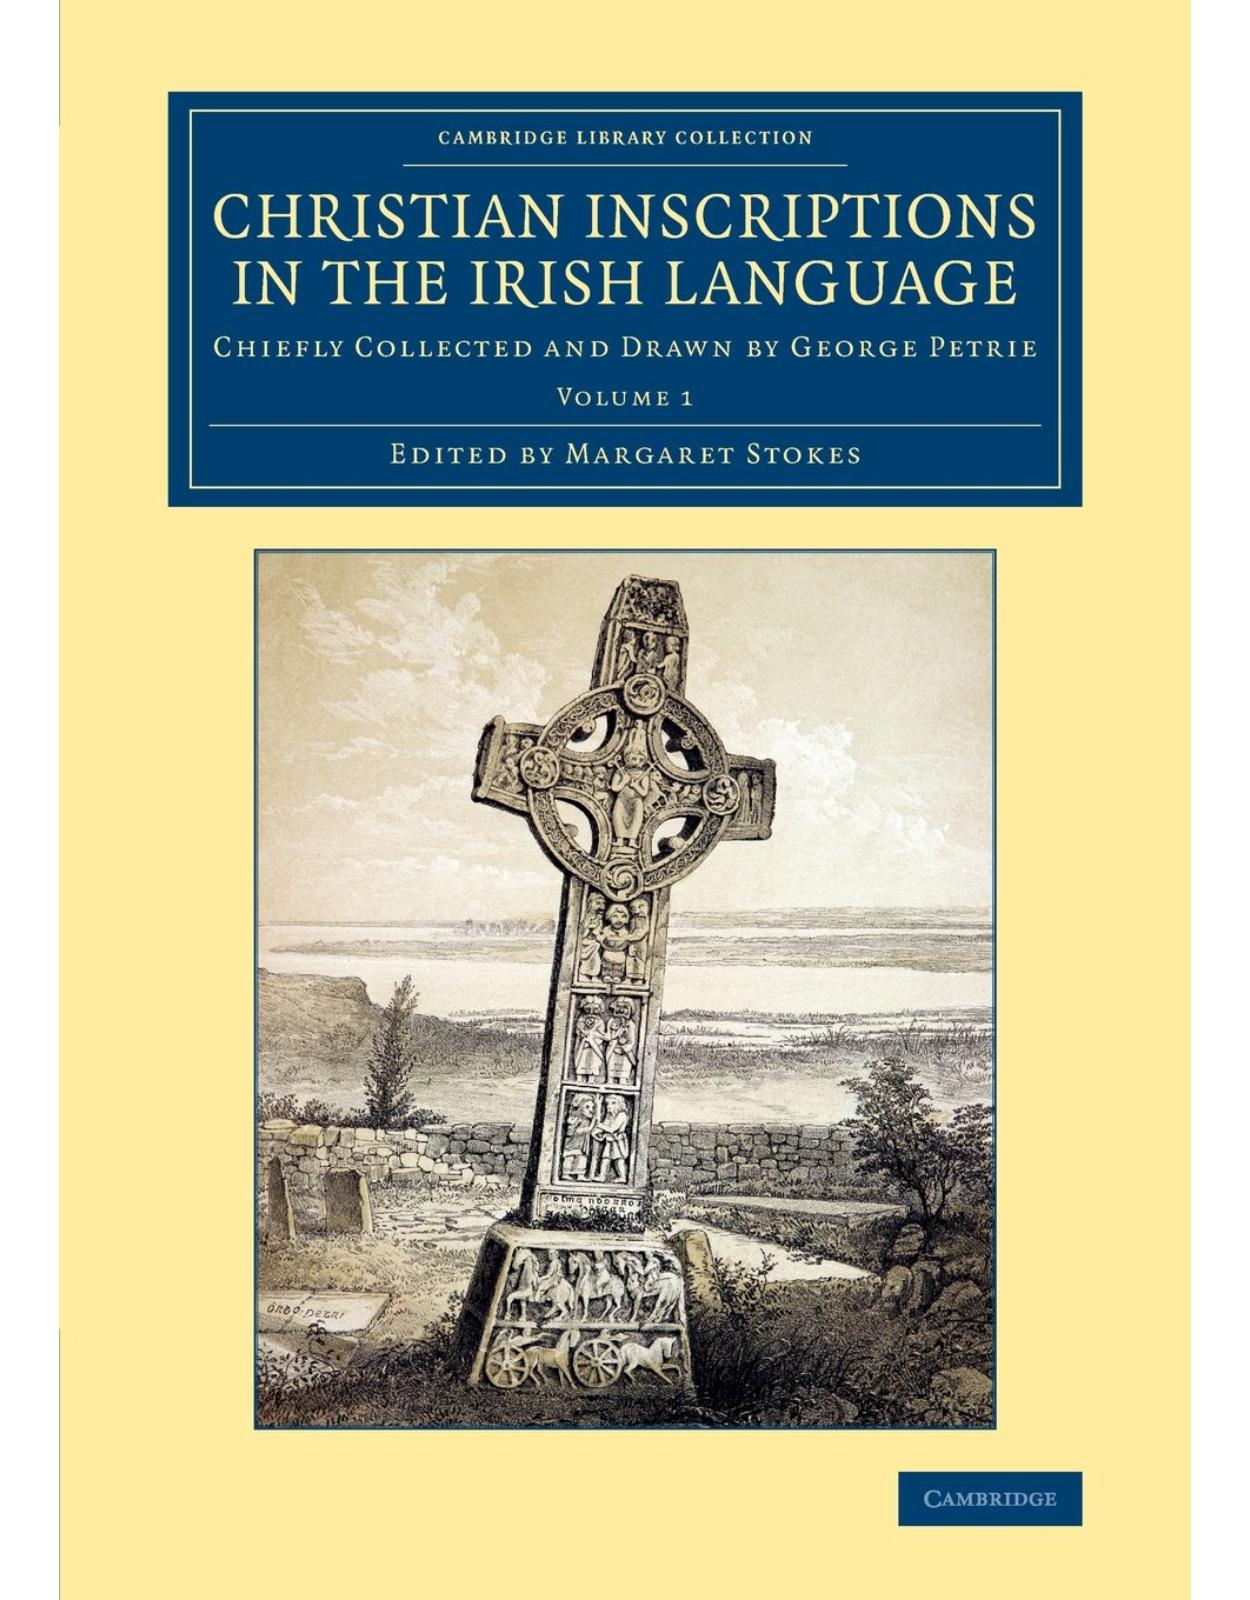 Christian Inscriptions in the Irish Language 2 Volume Set: Christian Inscriptions in the Irish Language: Chiefly Collected and Drawn by George Petrie: ... (Cambridge Library Collection - Archaeology)